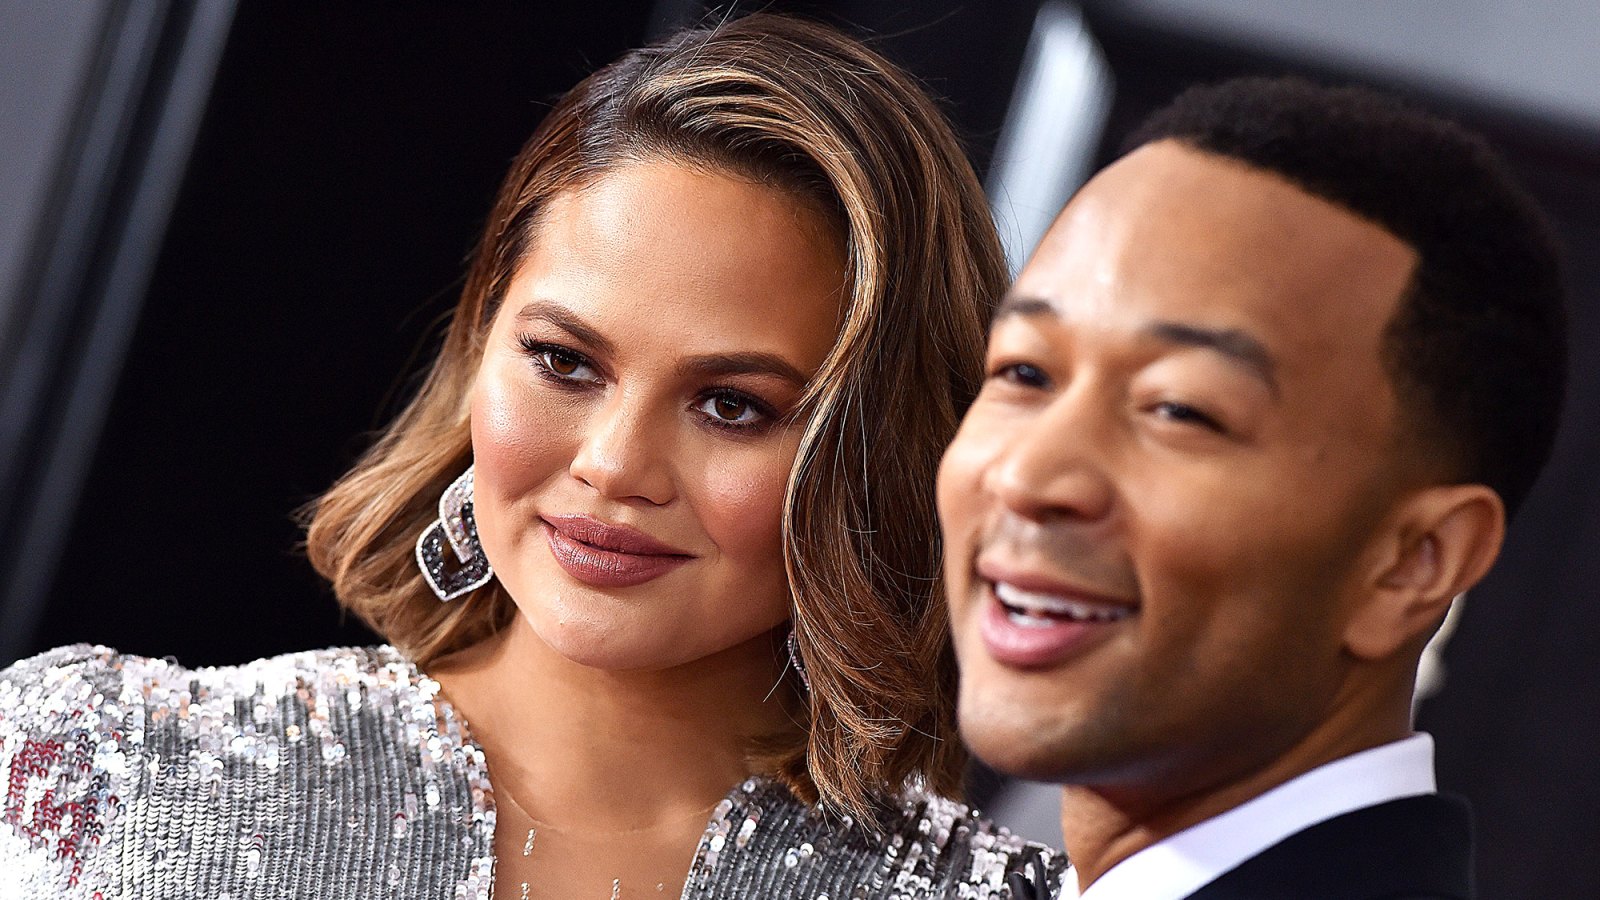 Chrissy Teigen Calls Her Husband John Legend the 'Best Lover' on His 40th Birthday, Defends Her Comment